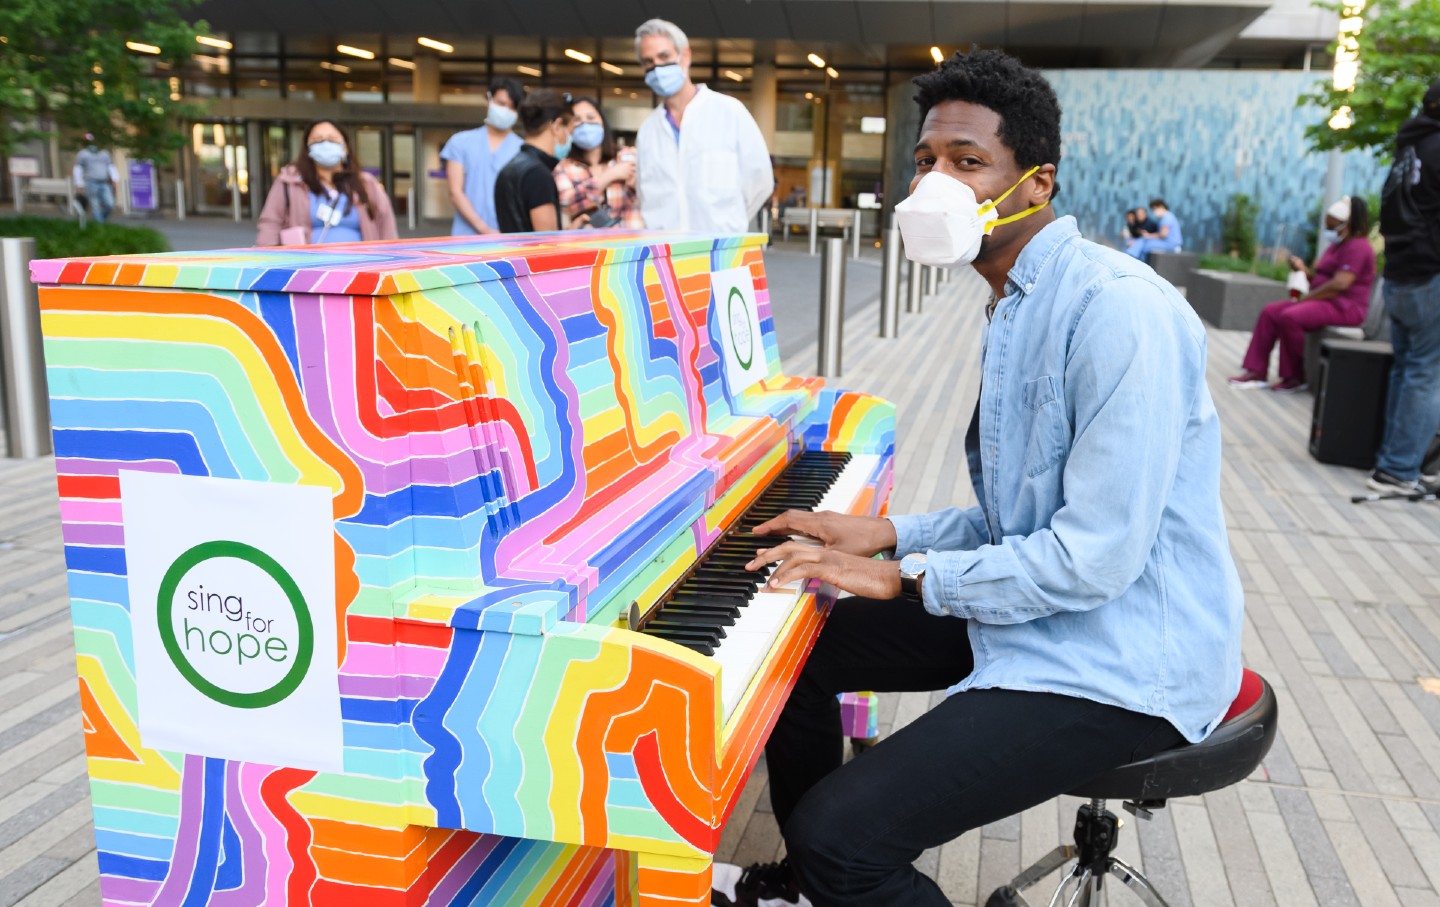 Jon Batiste plays a rainbow-colored piano outdoors as people in surgical masks walk by